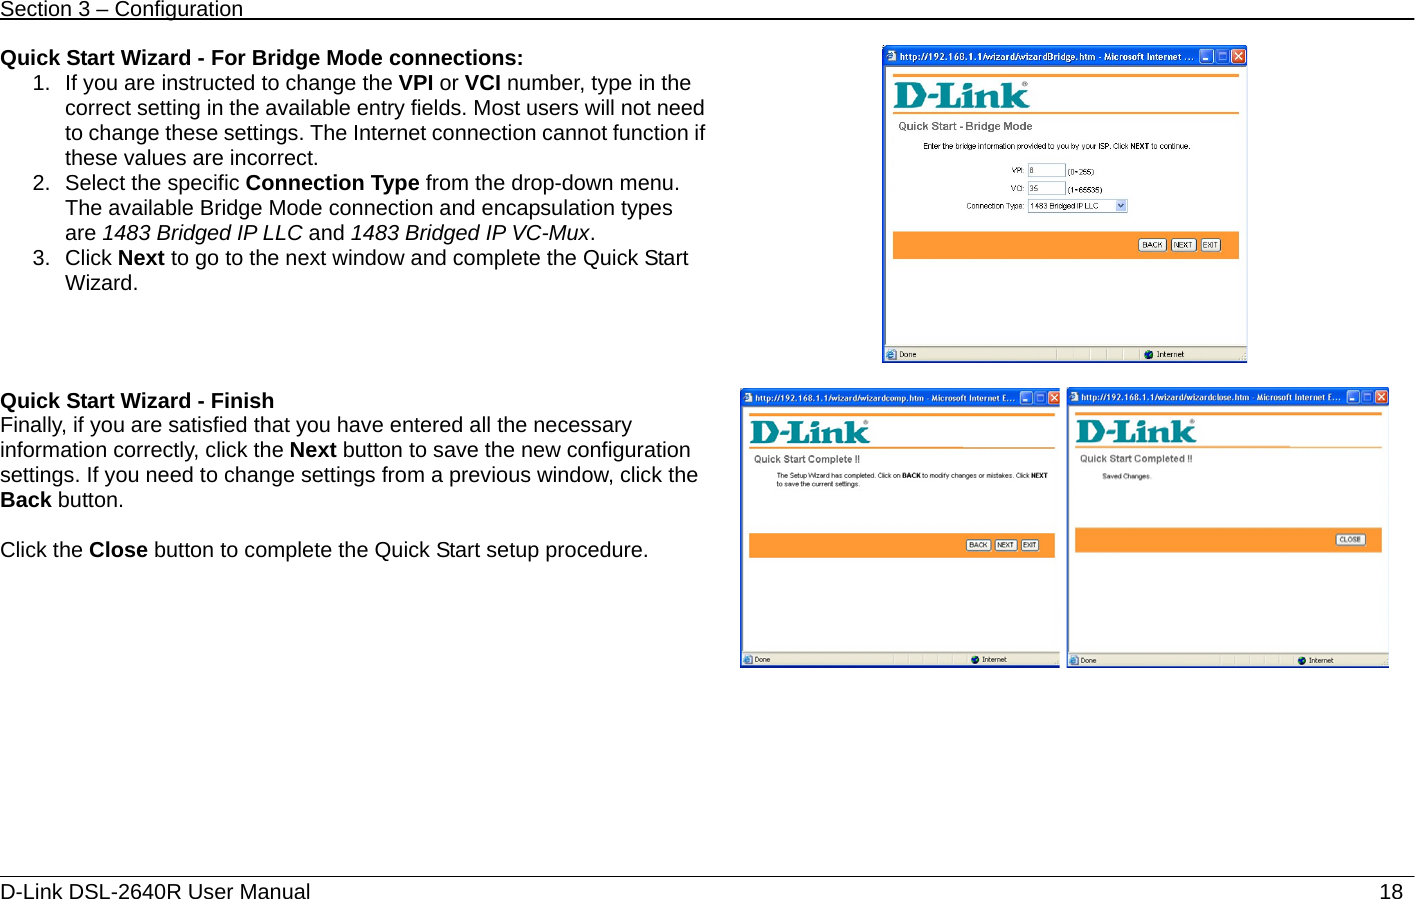 Section 3 – Configuration   D-Link DSL-2640R User Manual                           18Quick Start Wizard - For Bridge Mode connections: 1.  If you are instructed to change the VPI or VCI number, type in the correct setting in the available entry fields. Most users will not need to change these settings. The Internet connection cannot function if these values are incorrect. 2. Select the specific Connection Type from the drop-down menu. The available Bridge Mode connection and encapsulation types are 1483 Bridged IP LLC and 1483 Bridged IP VC-Mux. 3. Click Next to go to the next window and complete the Quick Start Wizard.      Quick Start Wizard - Finish   Finally, if you are satisfied that you have entered all the necessary information correctly, click the Next button to save the new configuration settings. If you need to change settings from a previous window, click the Back button.  Click the Close button to complete the Quick Start setup procedure.    